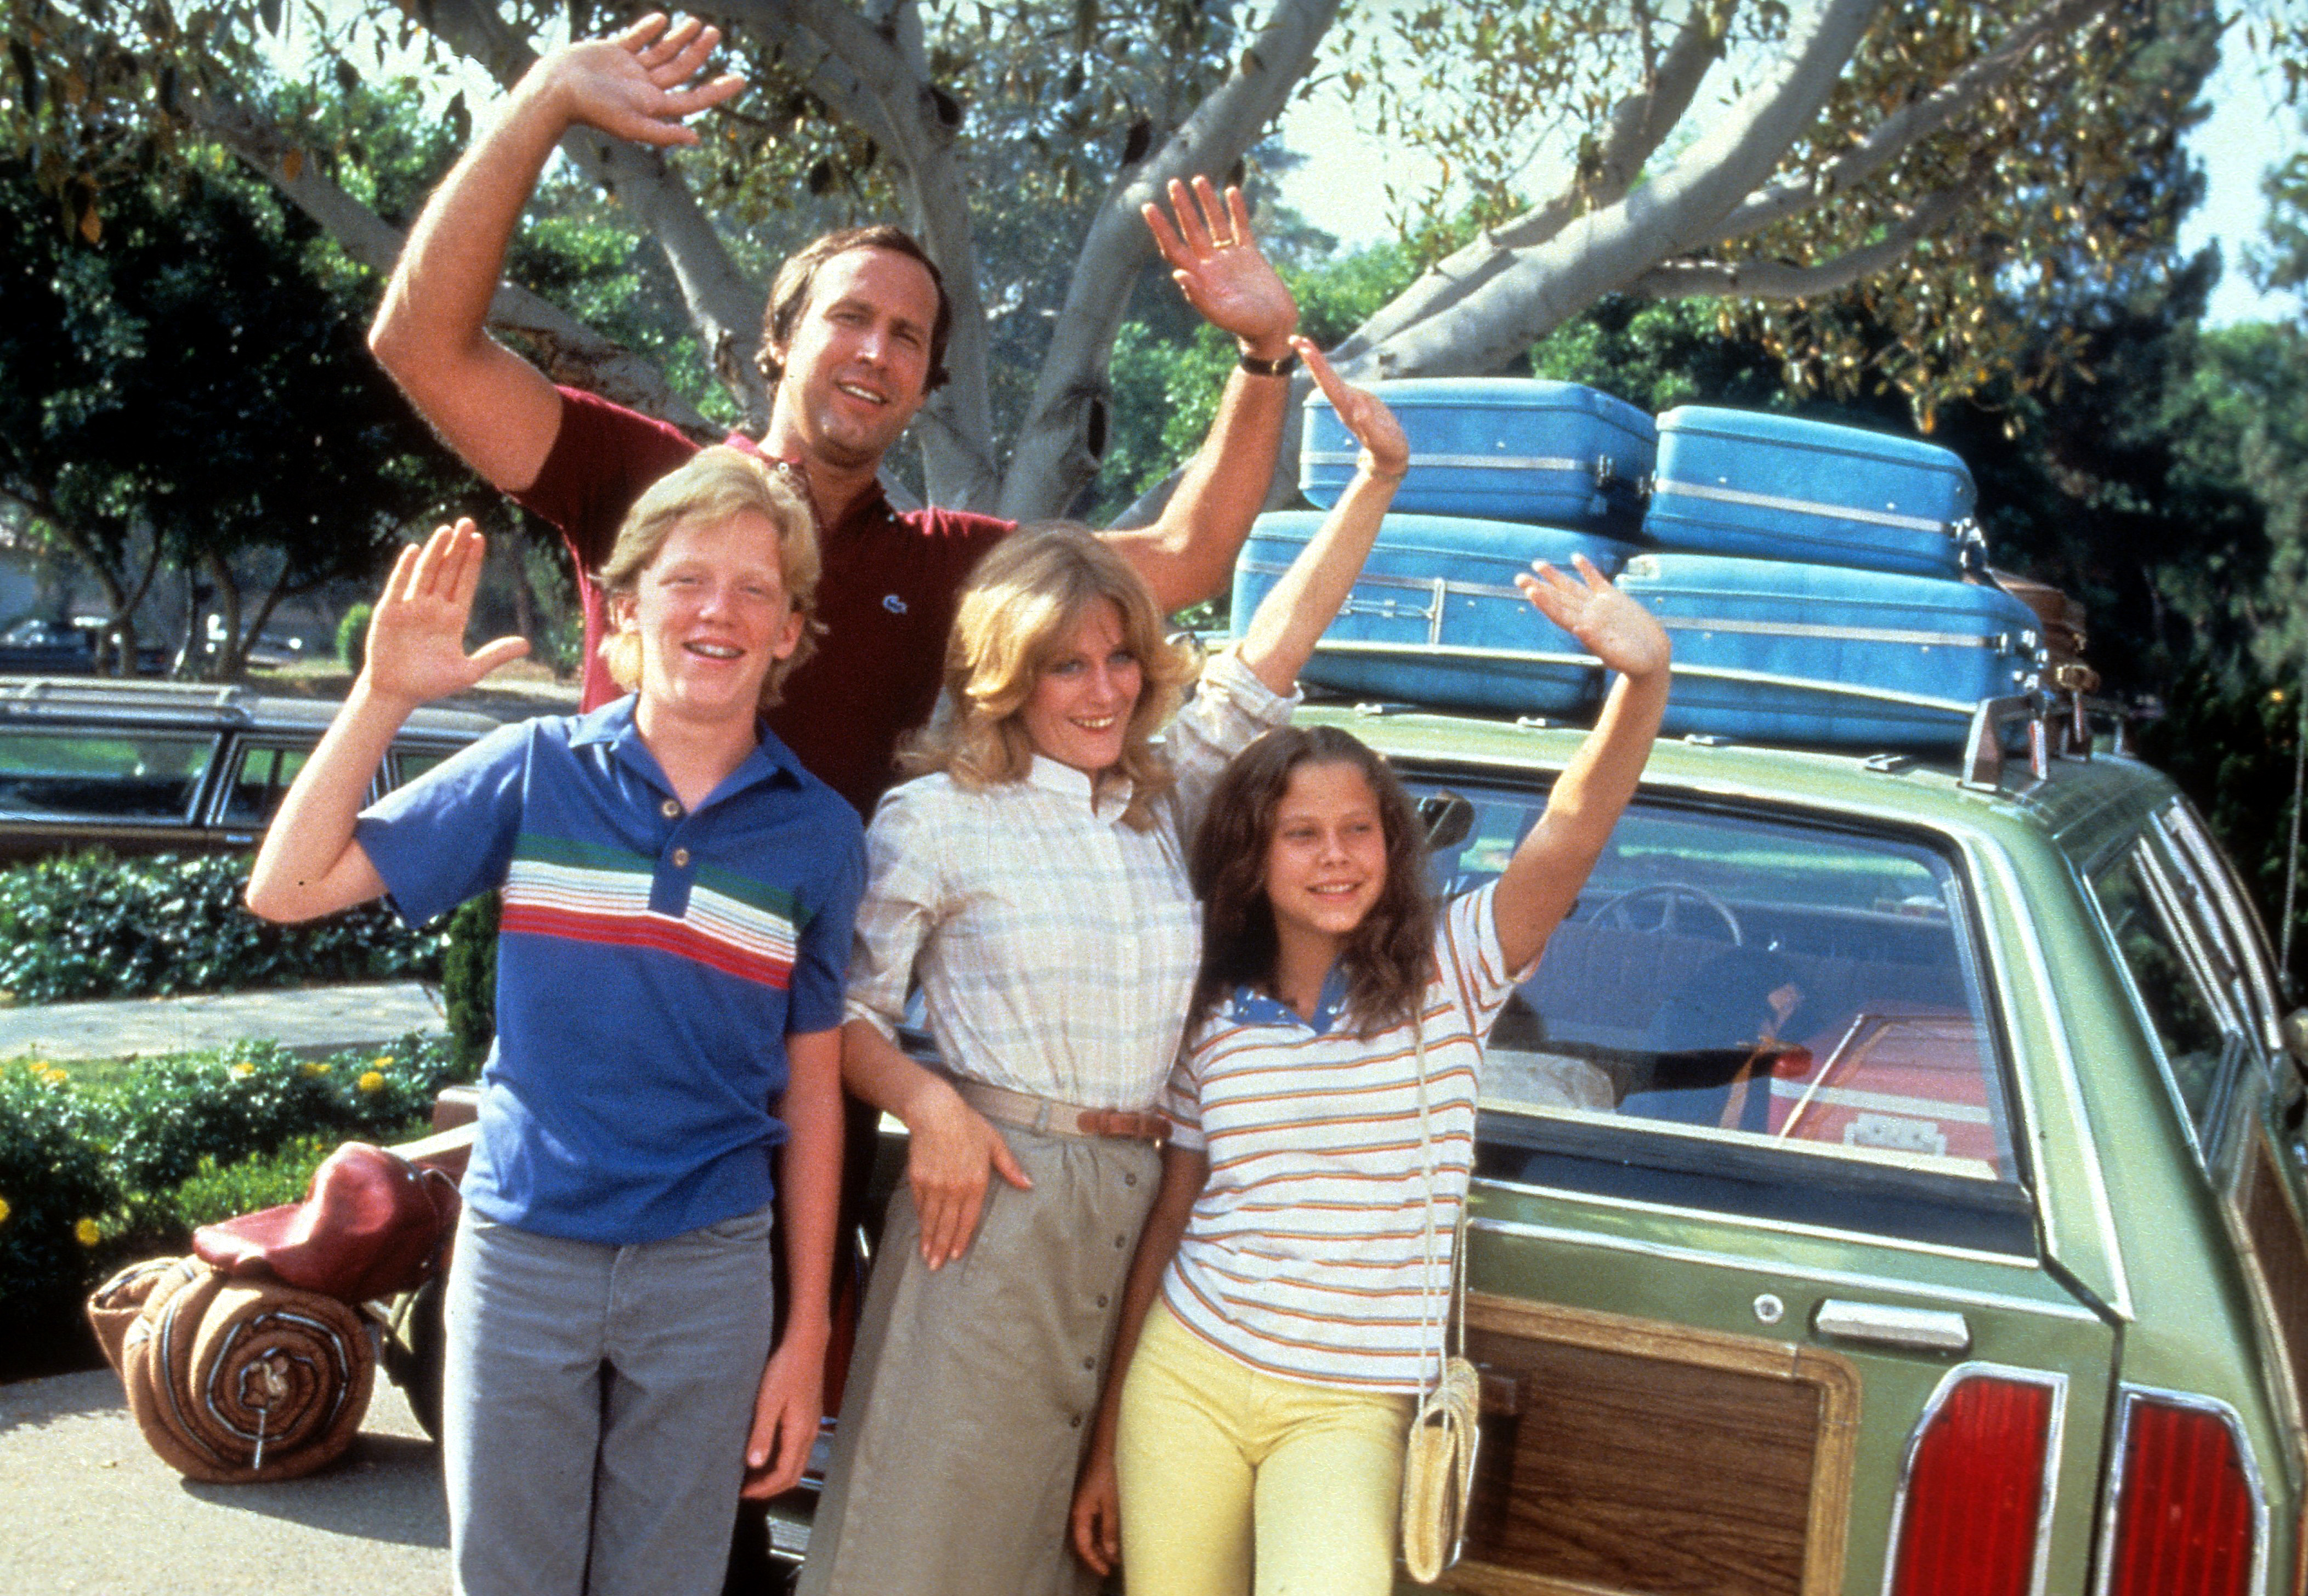 Chevy Chase, Beverly D'Angelo, Dana Barron and Anthony Michael Hall in "Vacation" in 1983 | Source: Getty Images